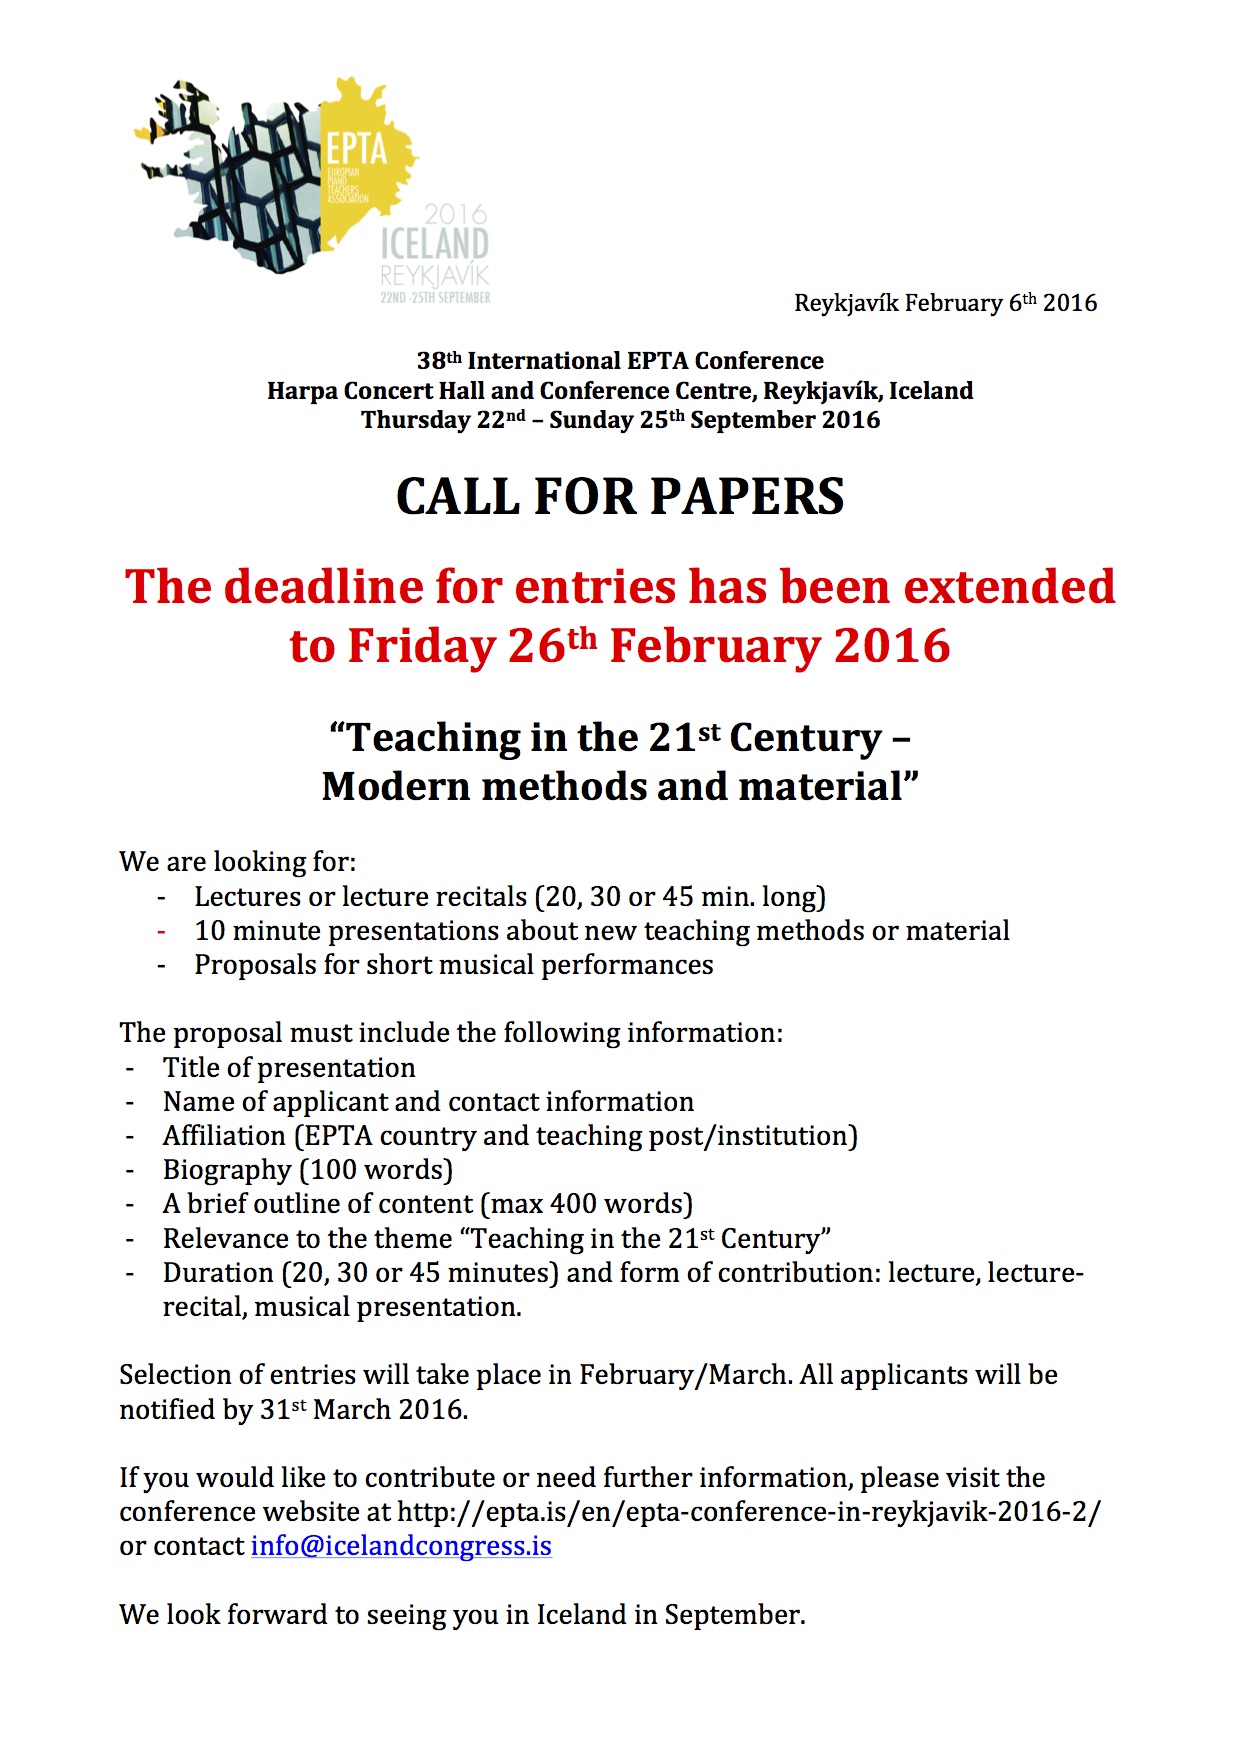 Call for papers extended